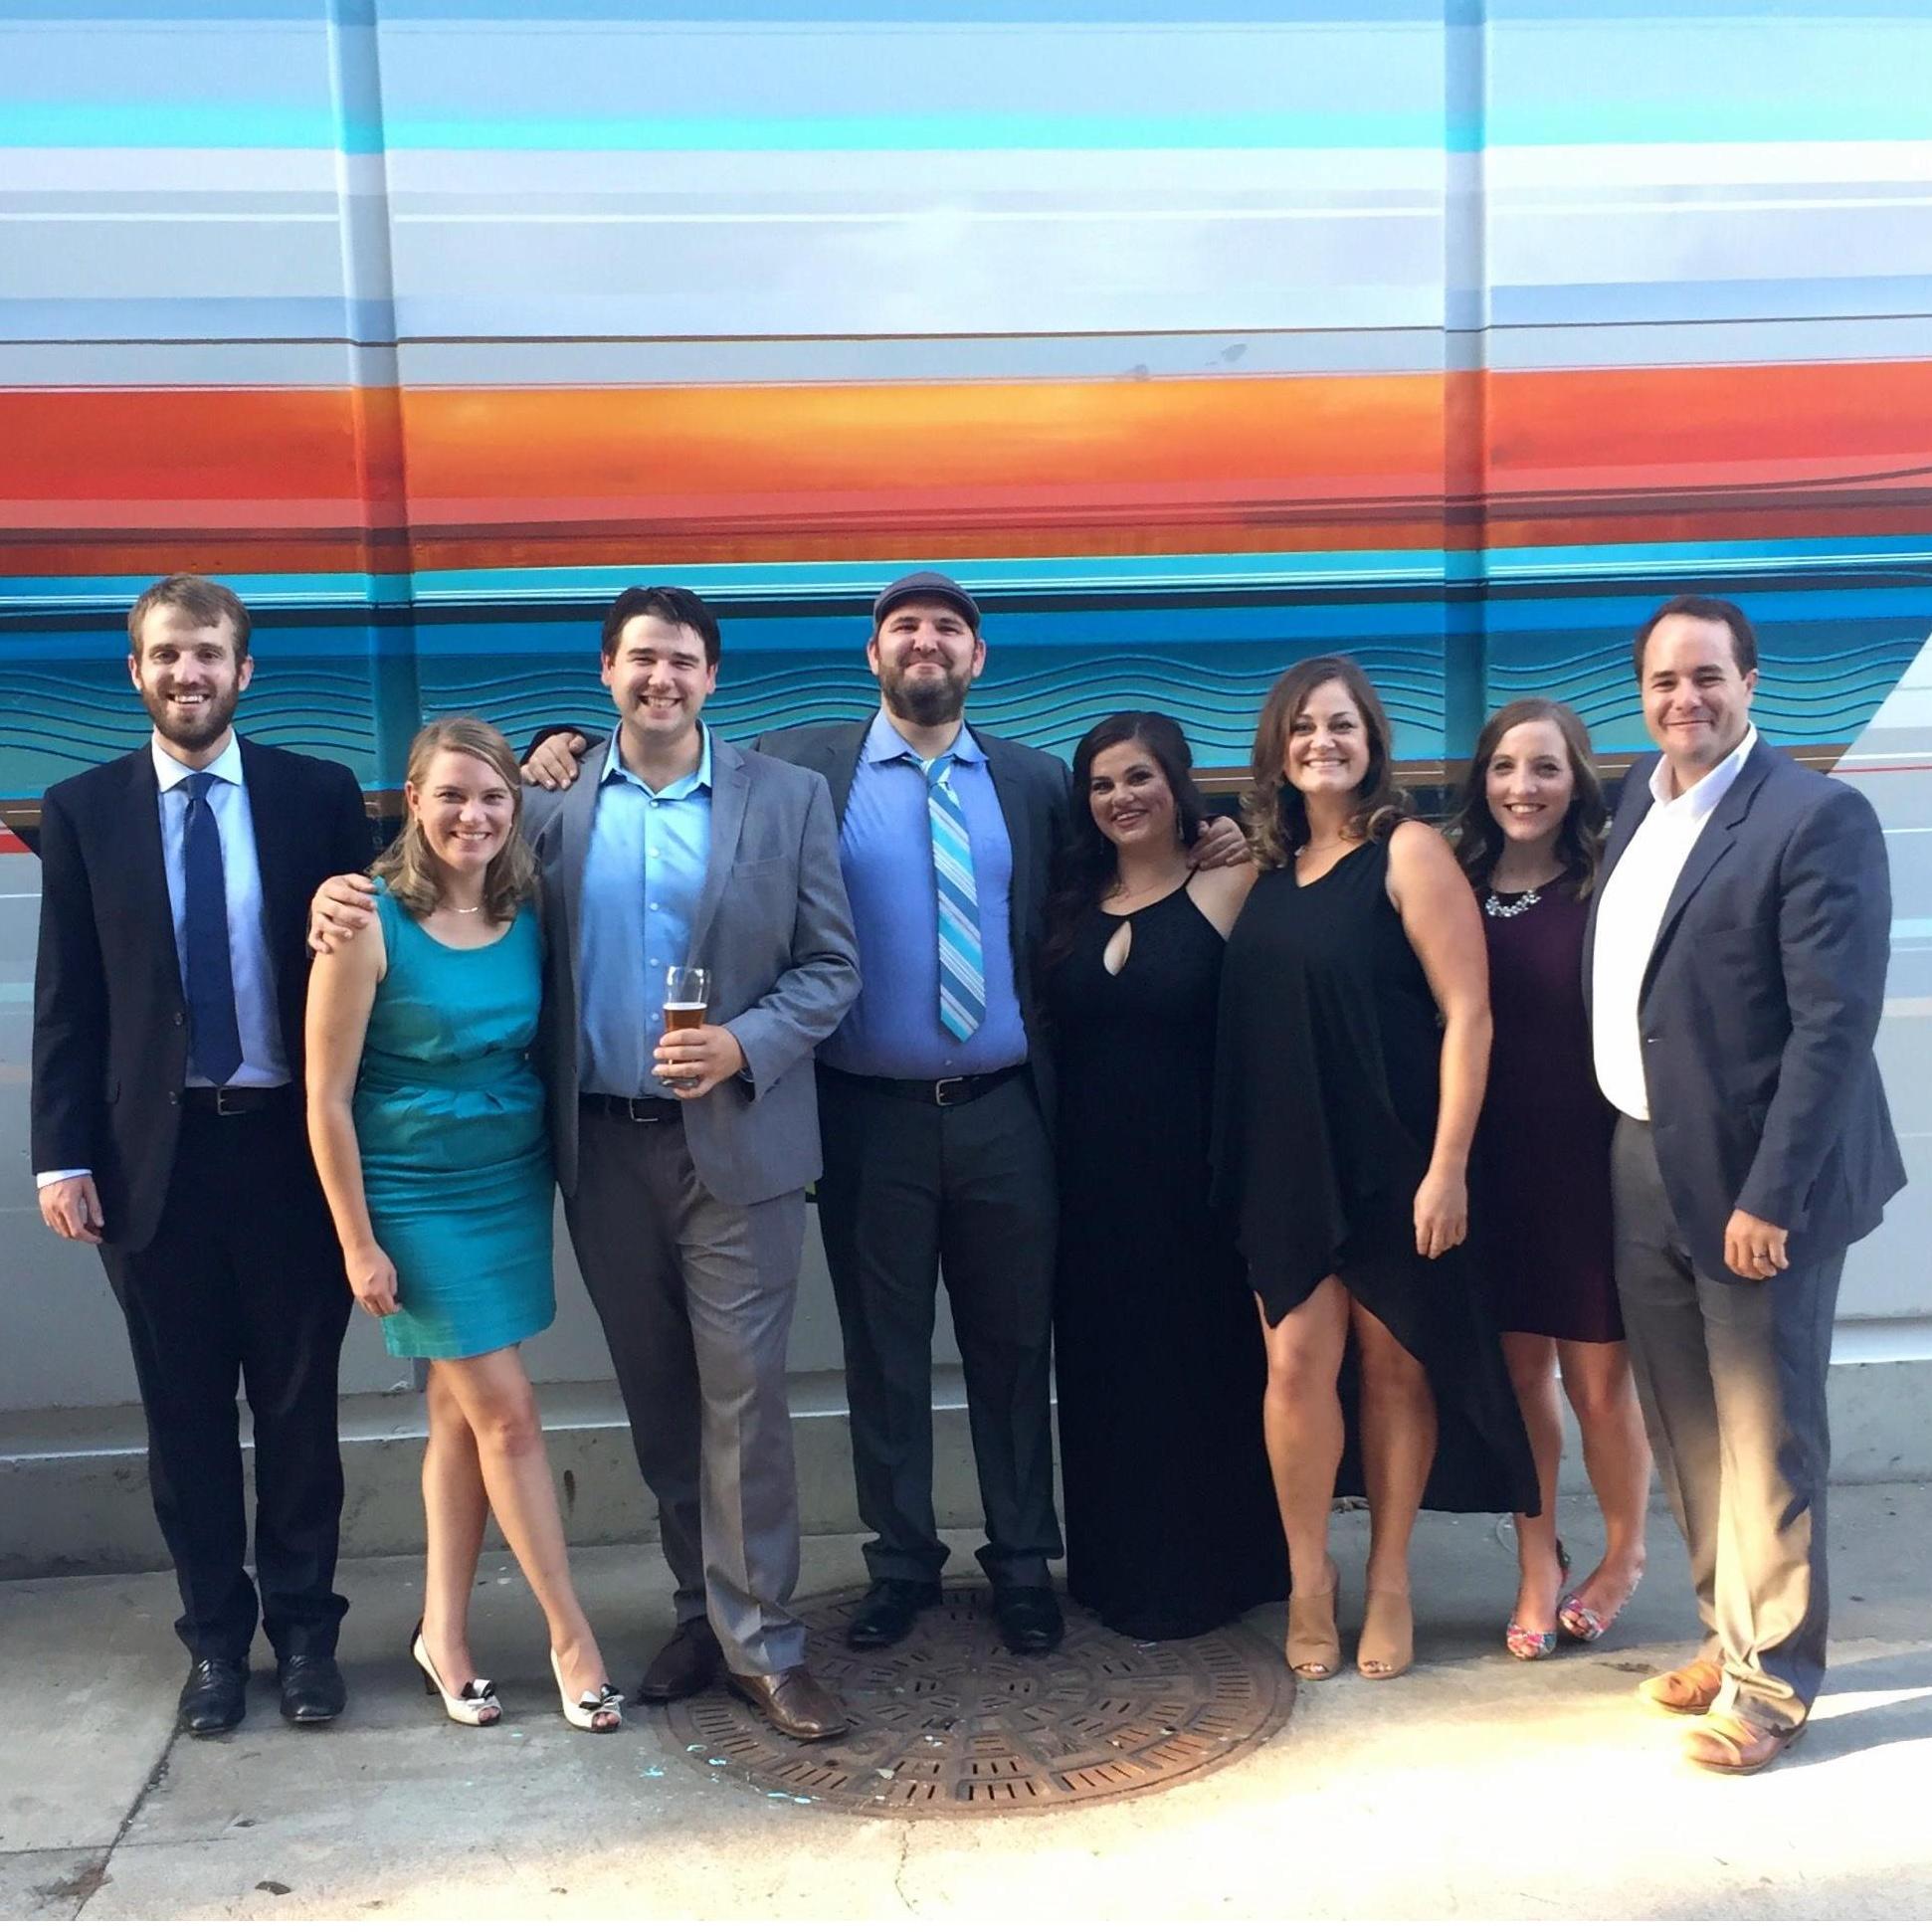 Enjoying the Midtown art vibe with friends after Cullen and Sara Crackle's wedding. 
Oliver, Stephanie, Perry, Ken, Dana, Tara, Beth, TJ.